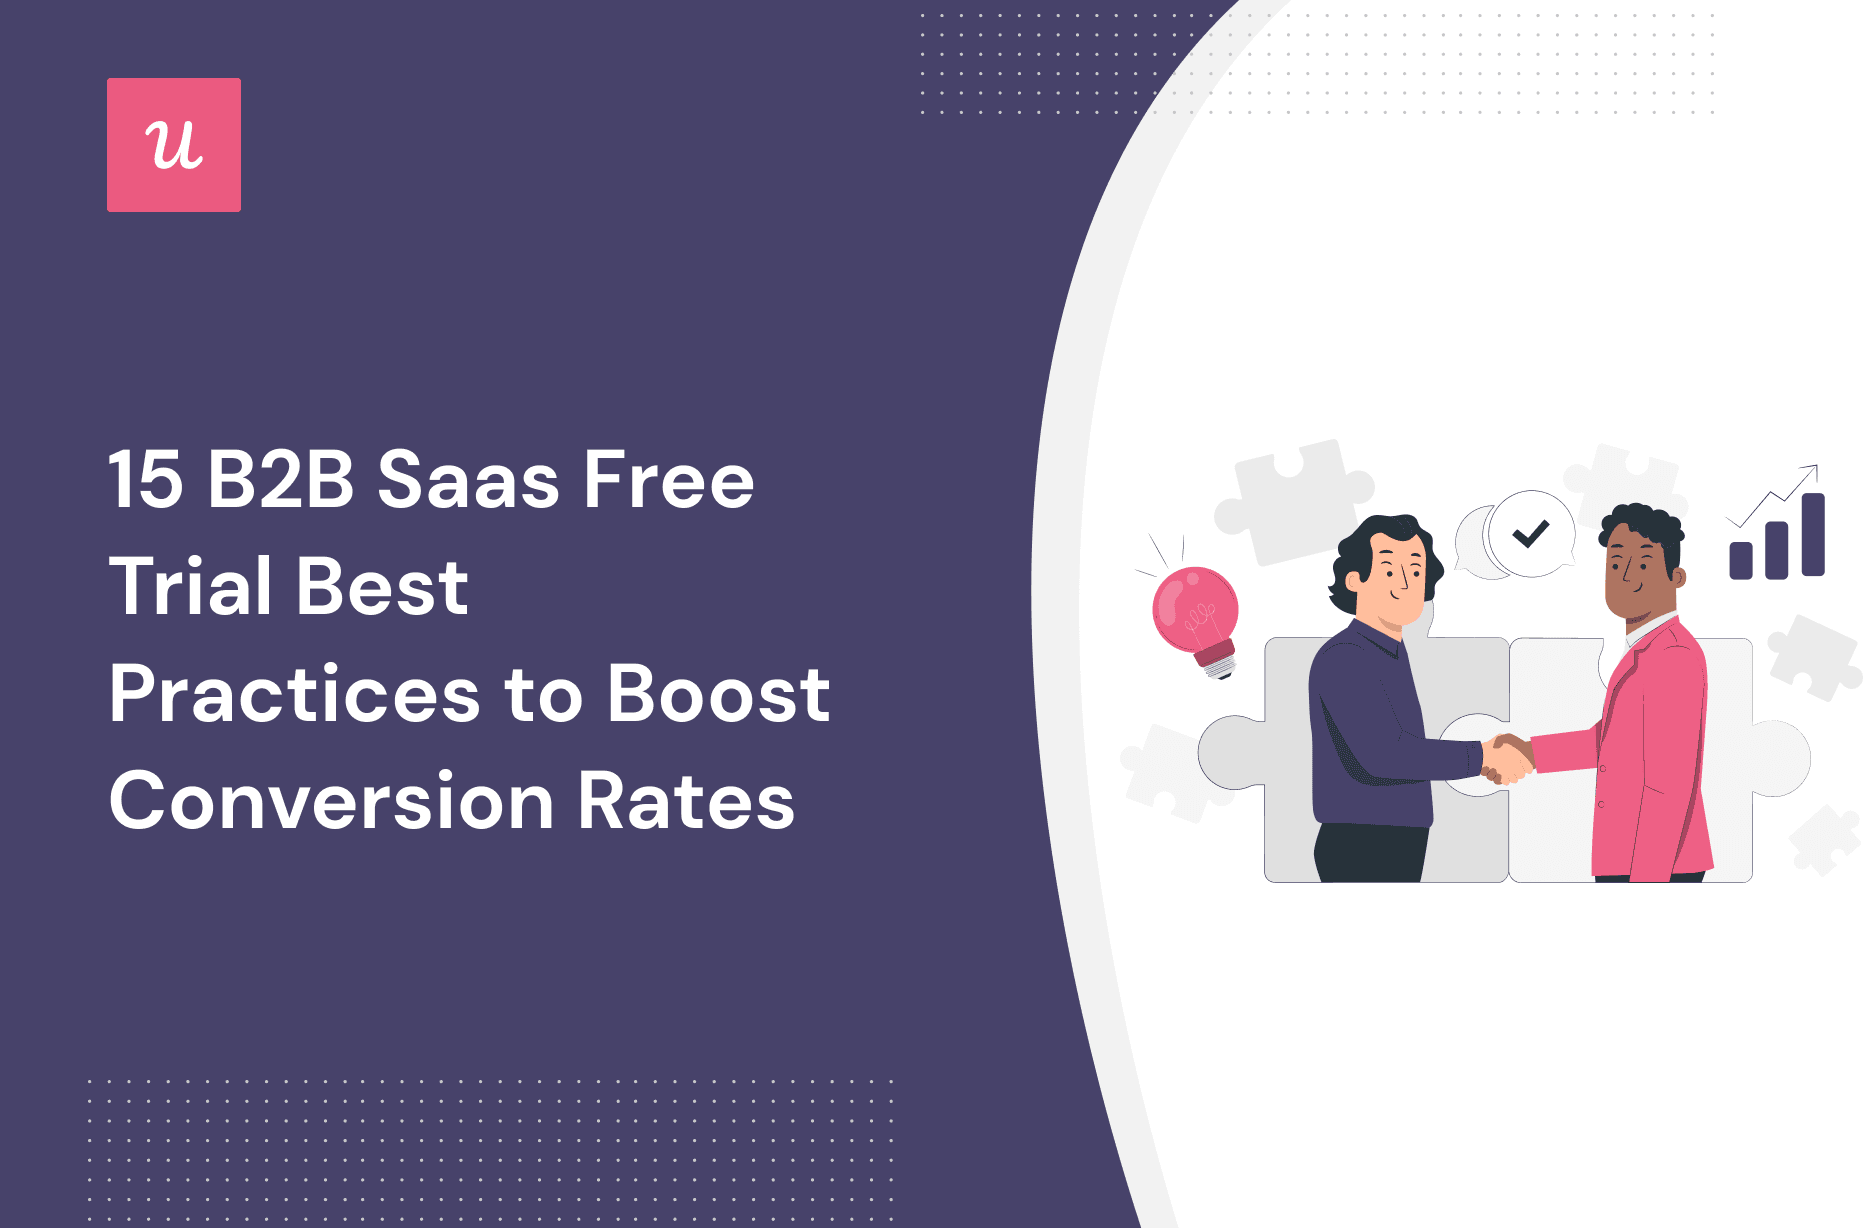 15 B2B SaaS Free Trial Best Practices To Boost Conversion Rates cover